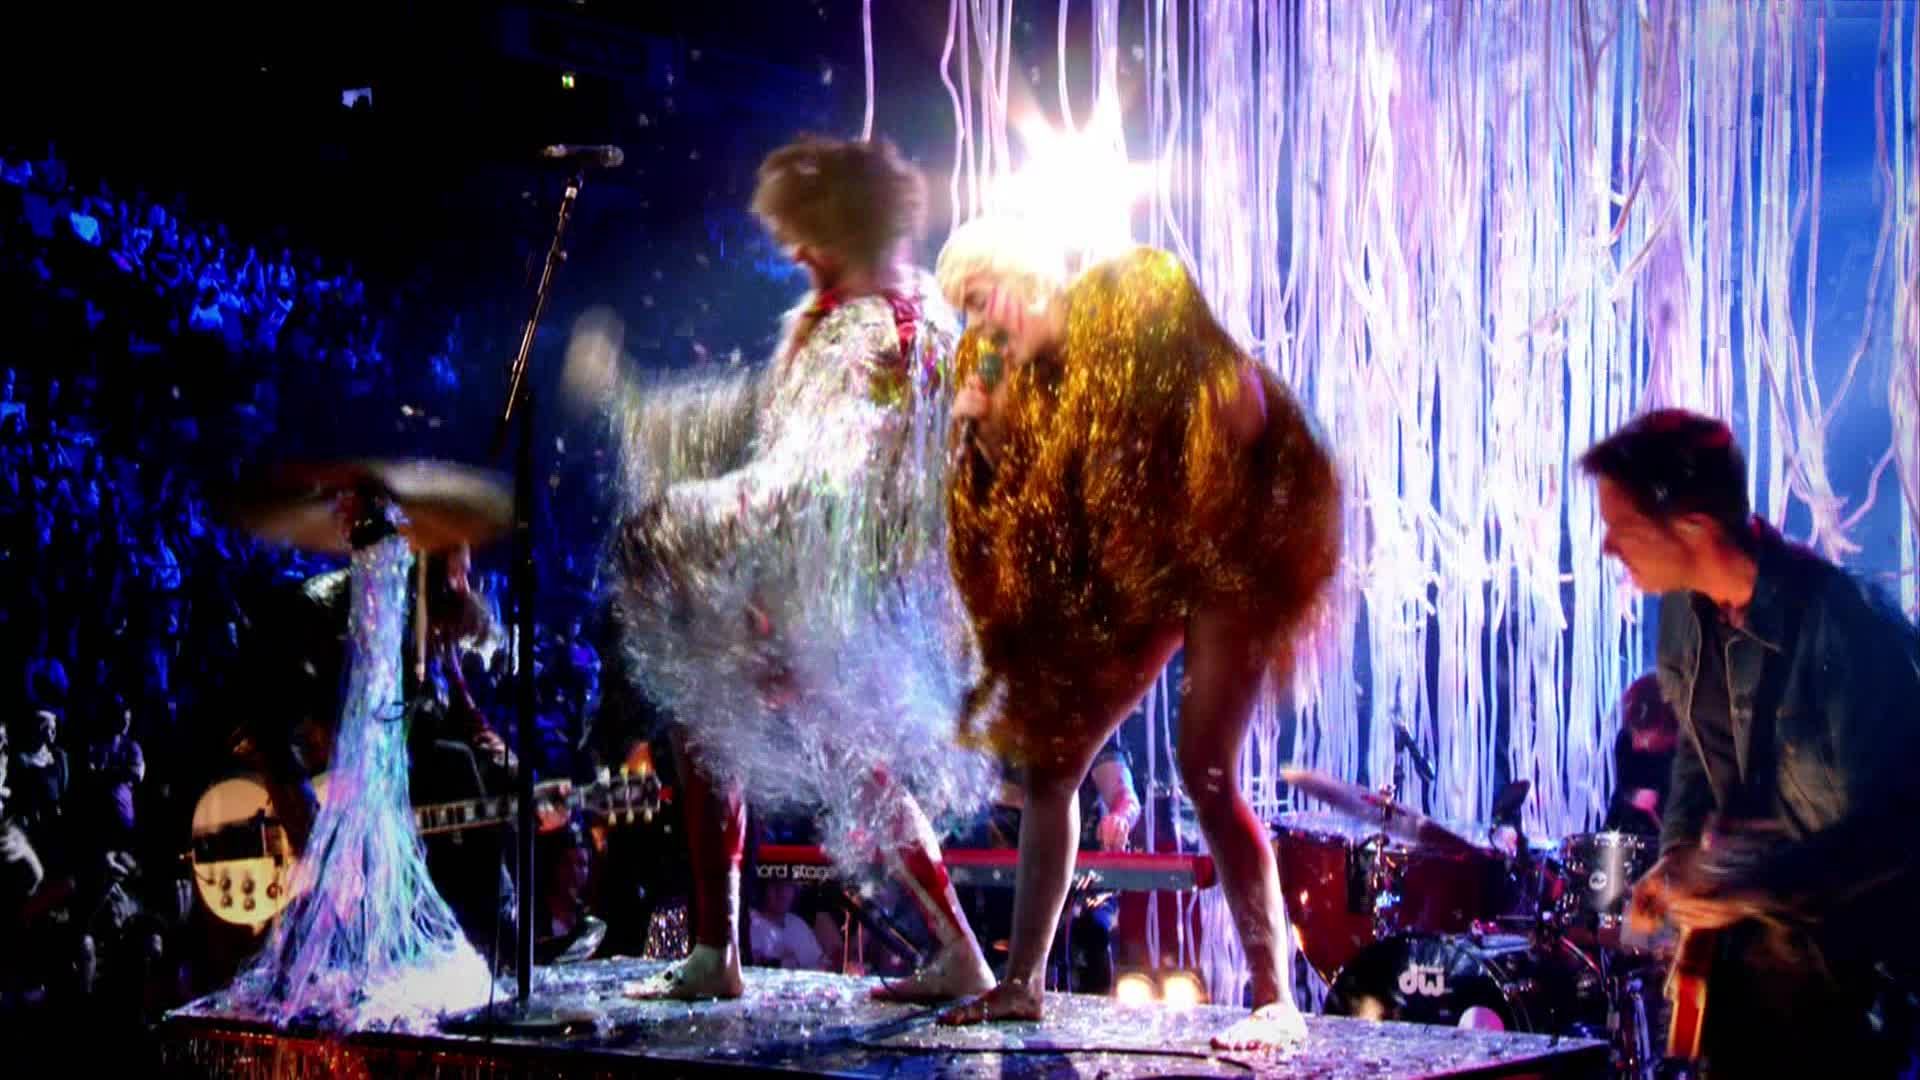 Miley Cyrus [ft The Flaming Lips] - 2014-05-18, Billboard Music Awards - 1080 TS - LSD preview 21